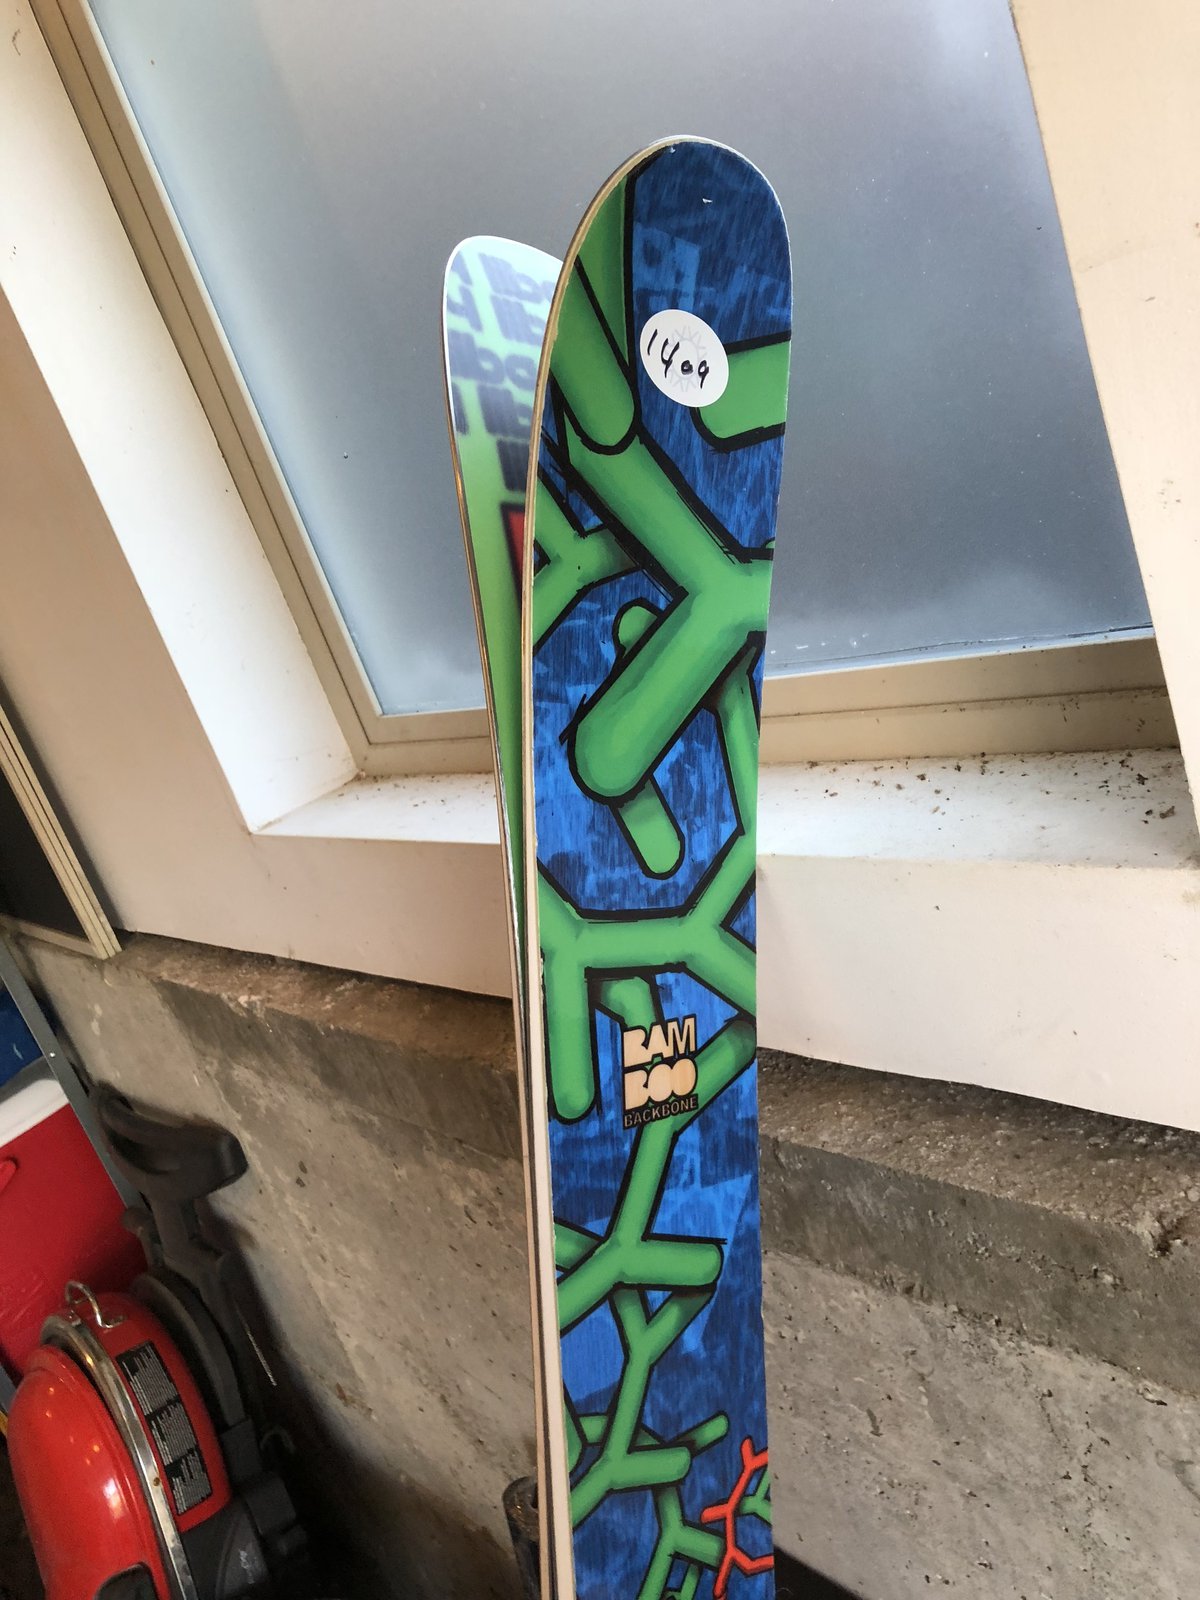 SELLING LIBERTY GENOME 2014 WIDEST POWDER SKIS ON THE MARKET WITH